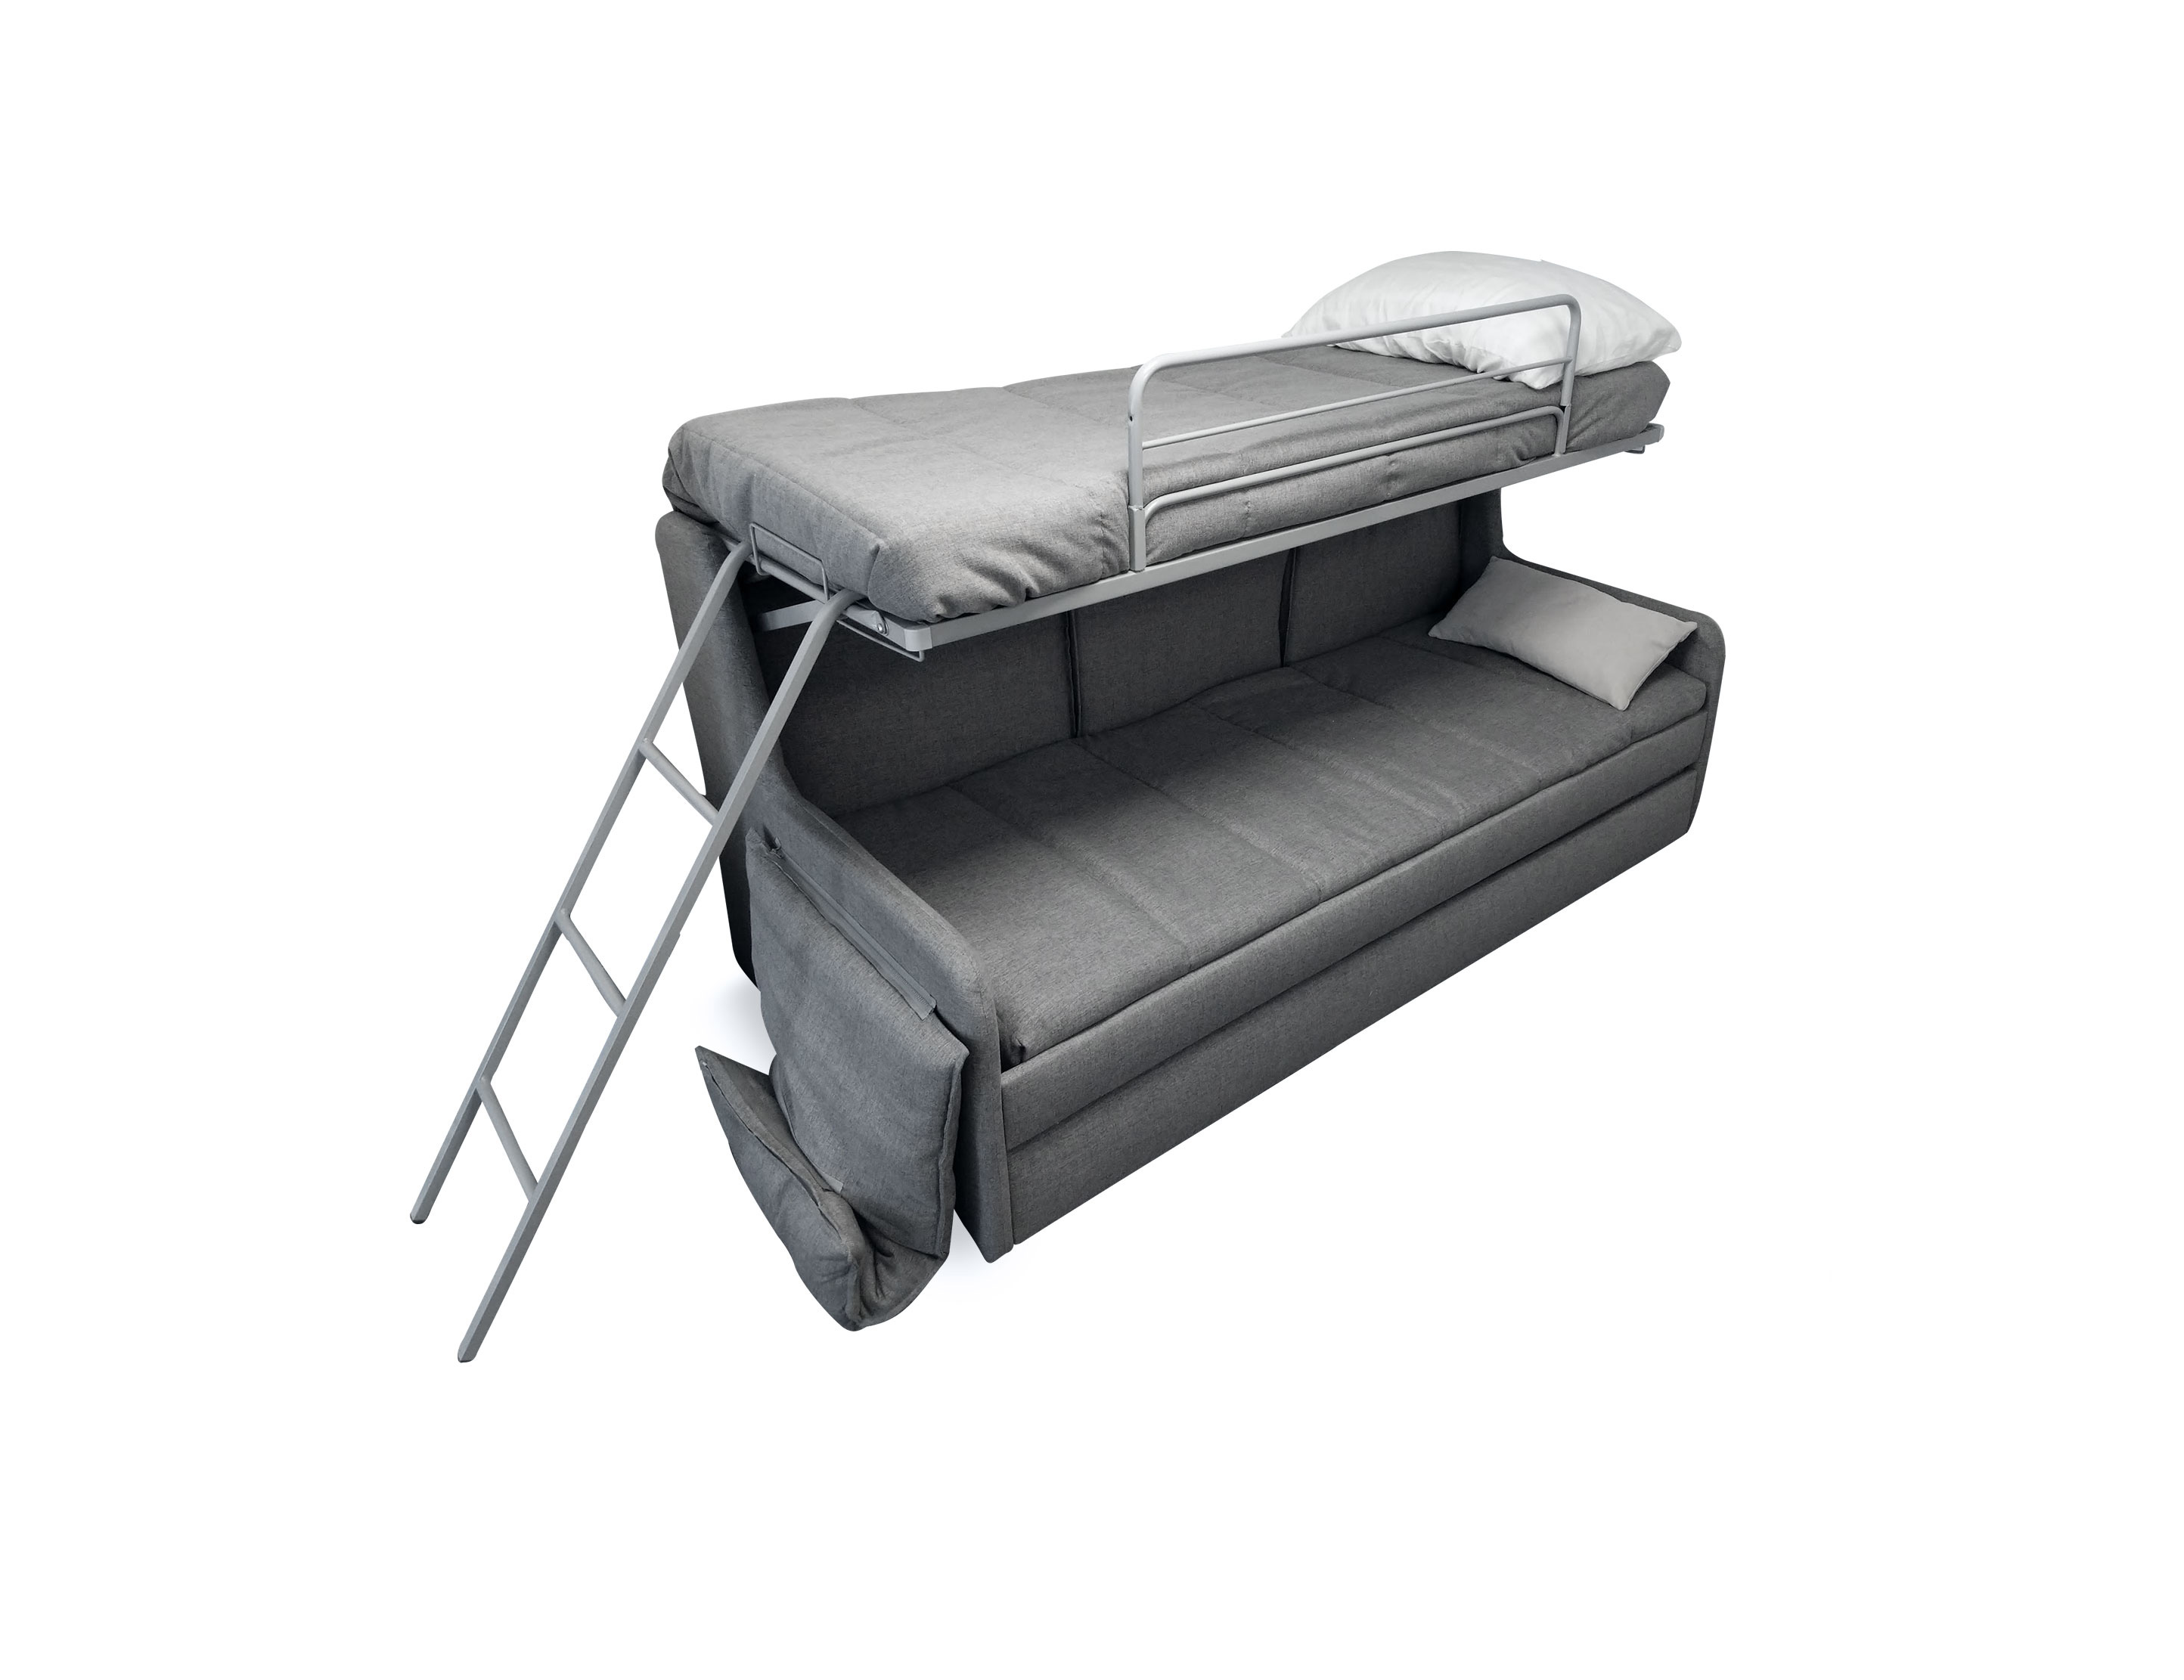 Transforming Sofa Bunk Bed Expand, Sofa That Folds Out To Bunk Beds